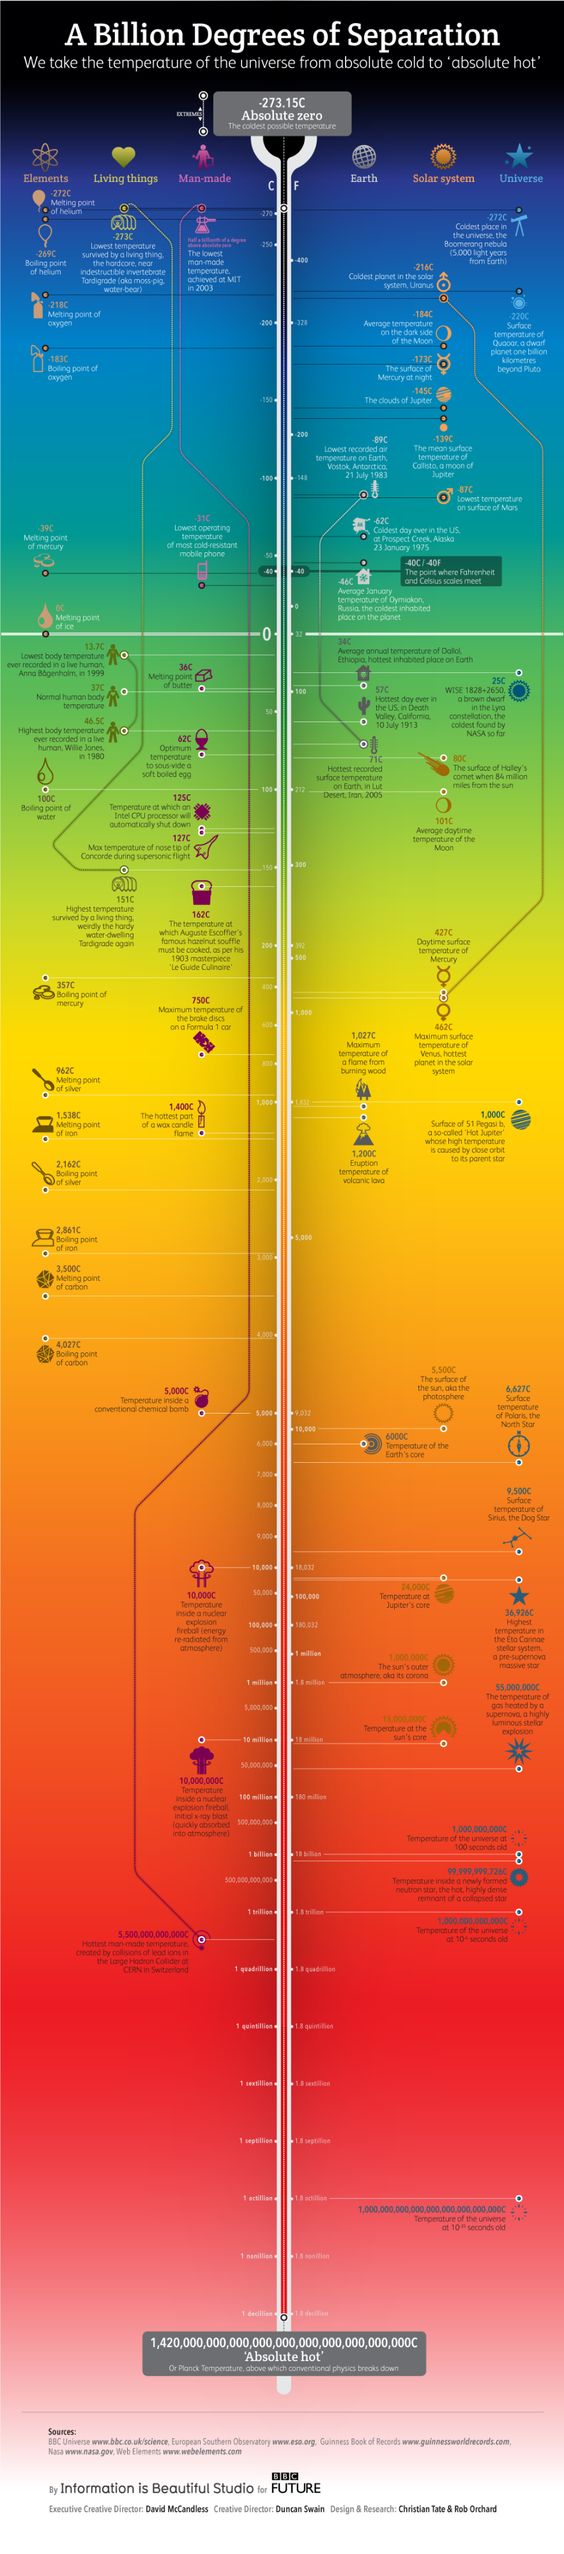 These are the hottest and coldest temperatures according to conventional physics